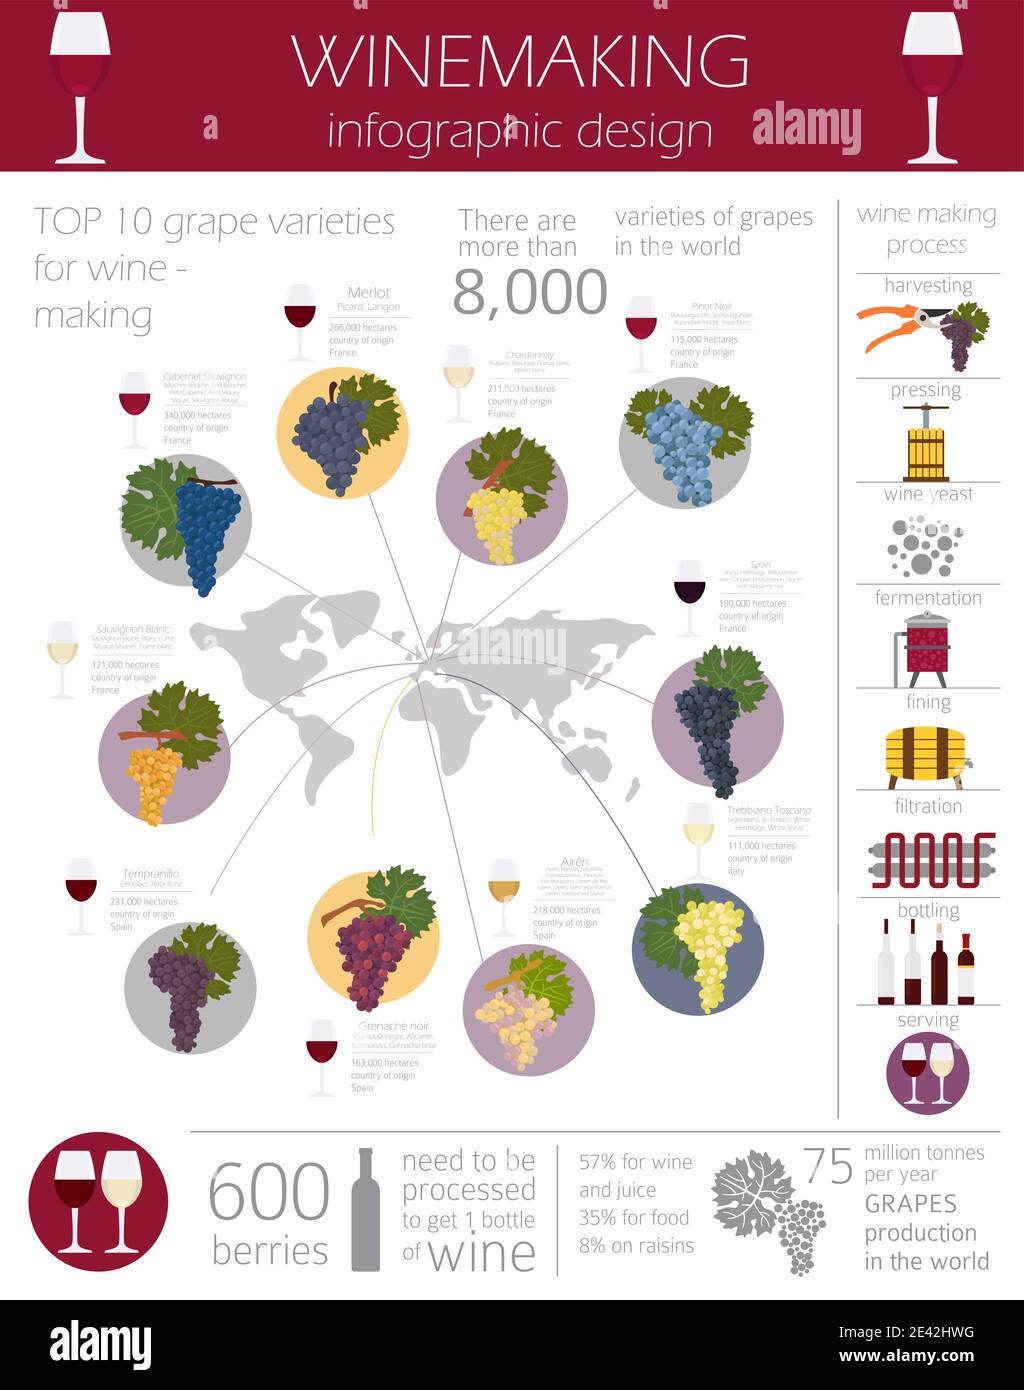 Grapes varieties for wine. Winemaking infographic. Vector illustration Stock Vector